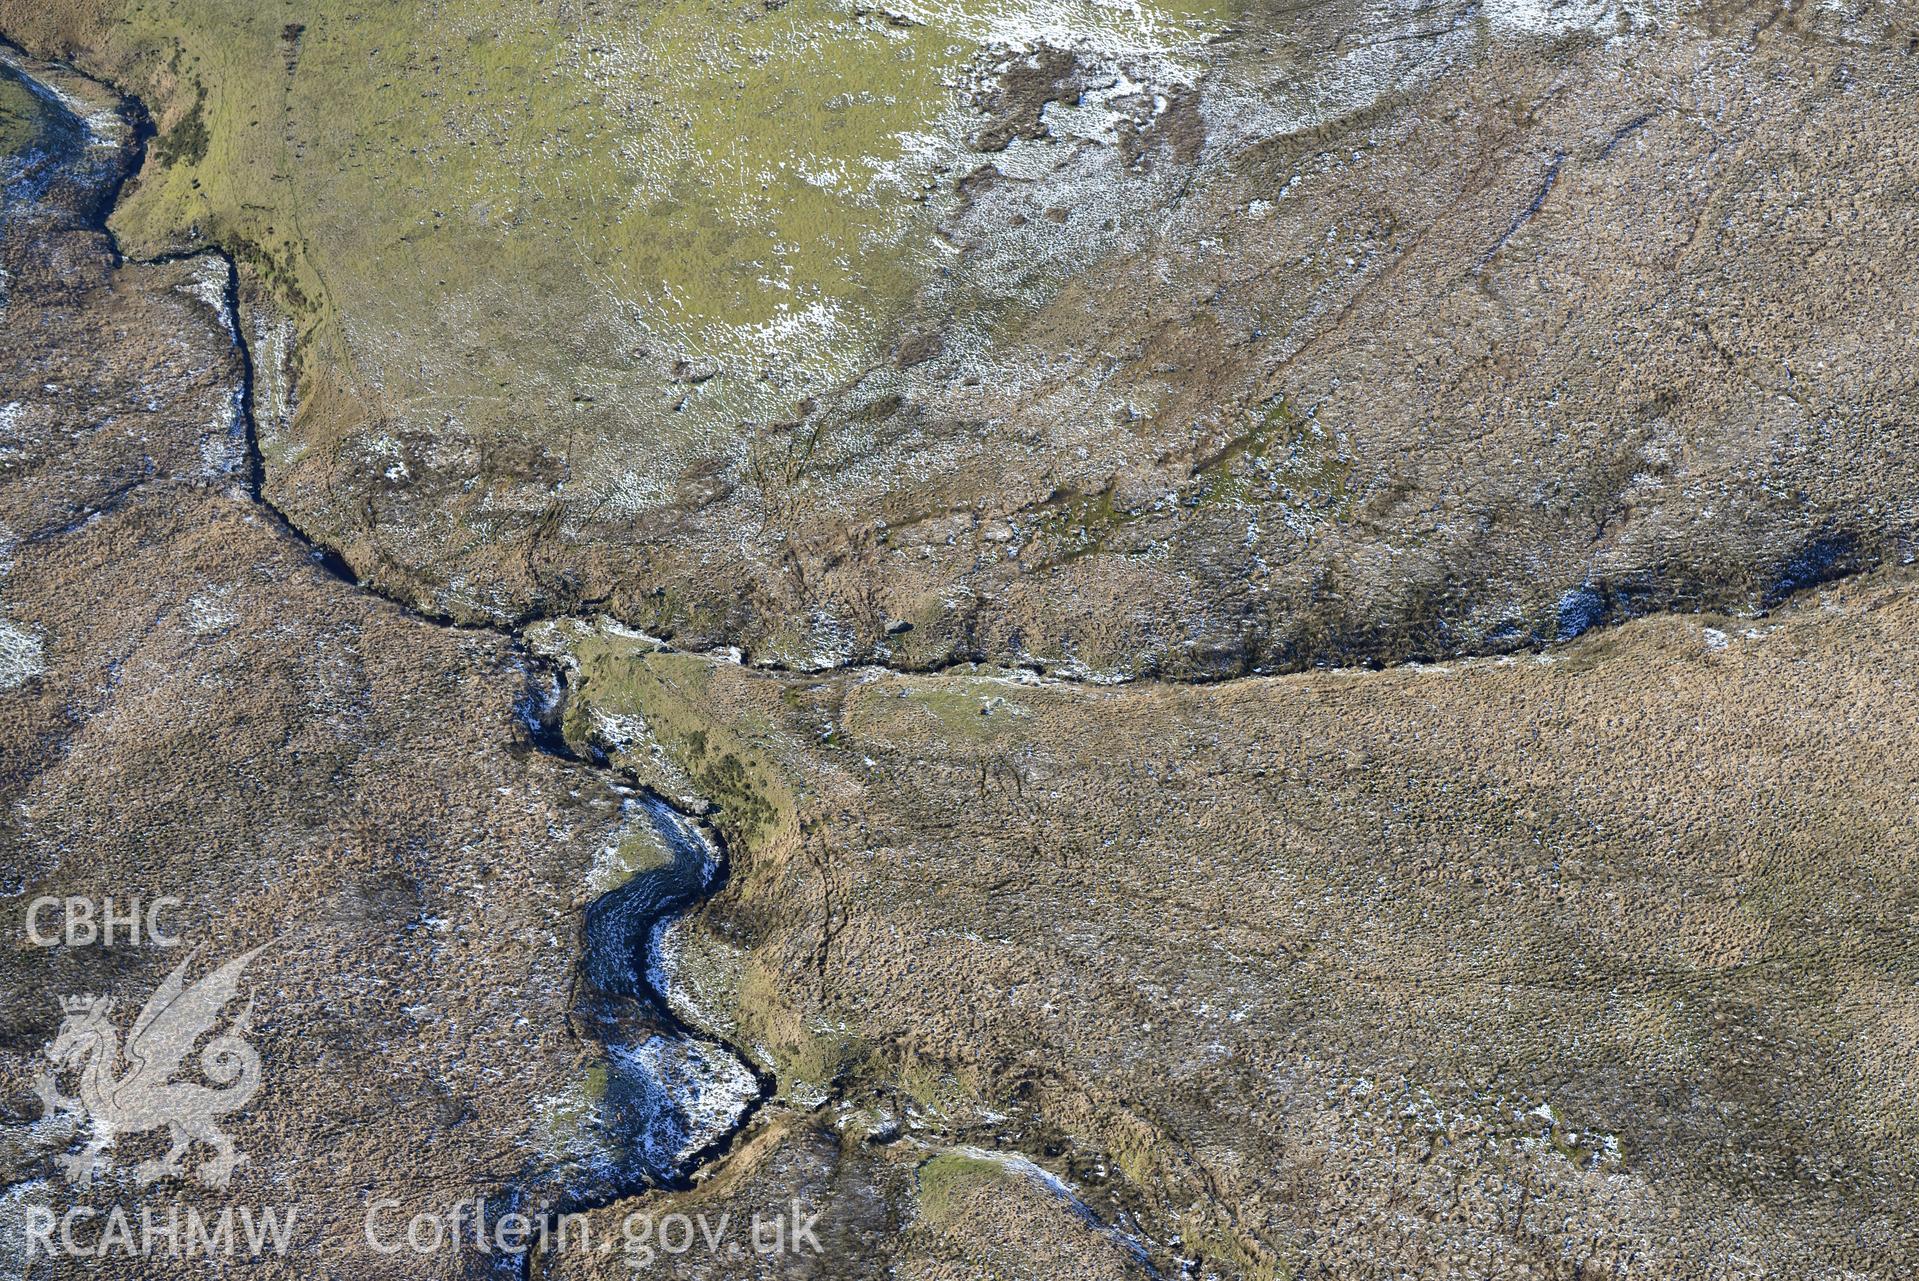 Blaen Brefi cairn, south east of Tregaron. Oblique aerial photograph taken during the Royal Commission's programme of archaeological aerial reconnaissance by Toby Driver on 4th February 2015.